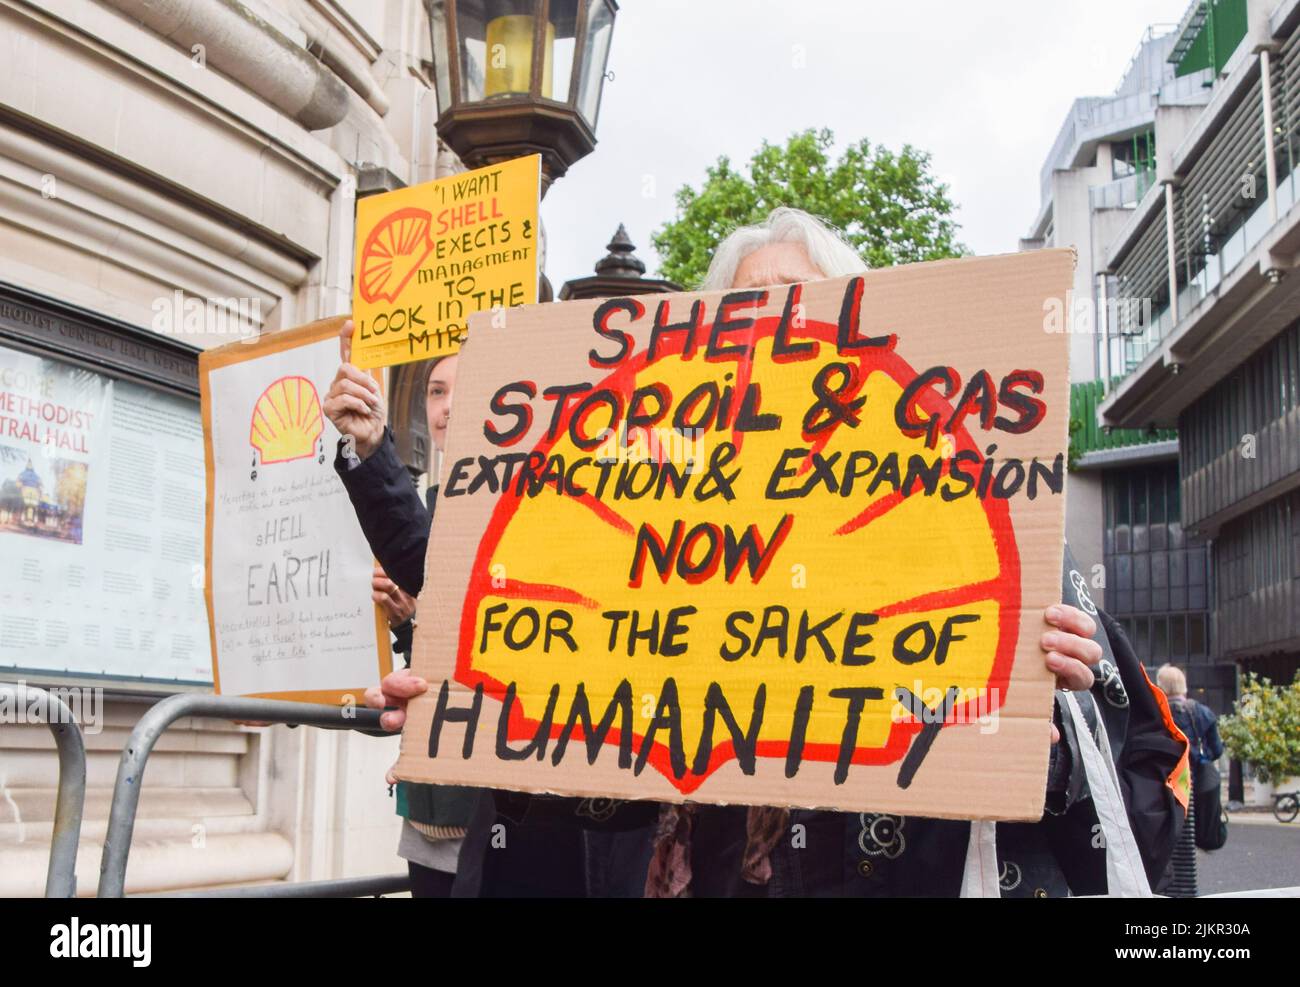 London, UK. 24th May 2022. Climate activists disrupted oil giant Shell's Annual General Meeting at Methodist Central Hall in Westminster. Protesters gathered outside while several dozean activists disrupted the meeting inside the venue. Stock Photo